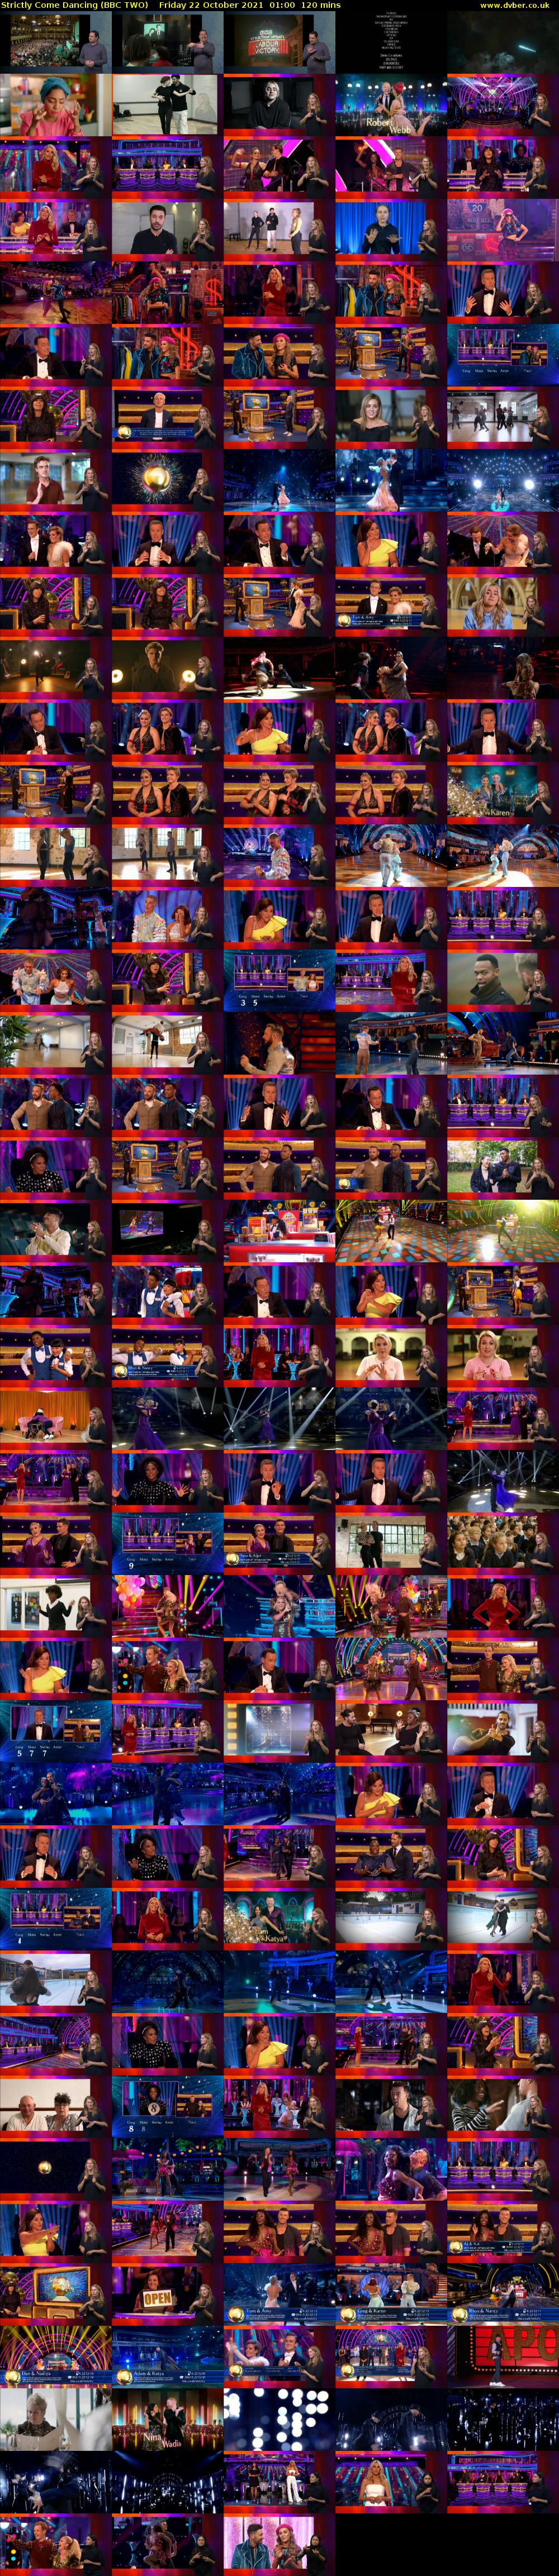 Strictly Come Dancing (BBC TWO) Friday 22 October 2021 01:00 - 03:00